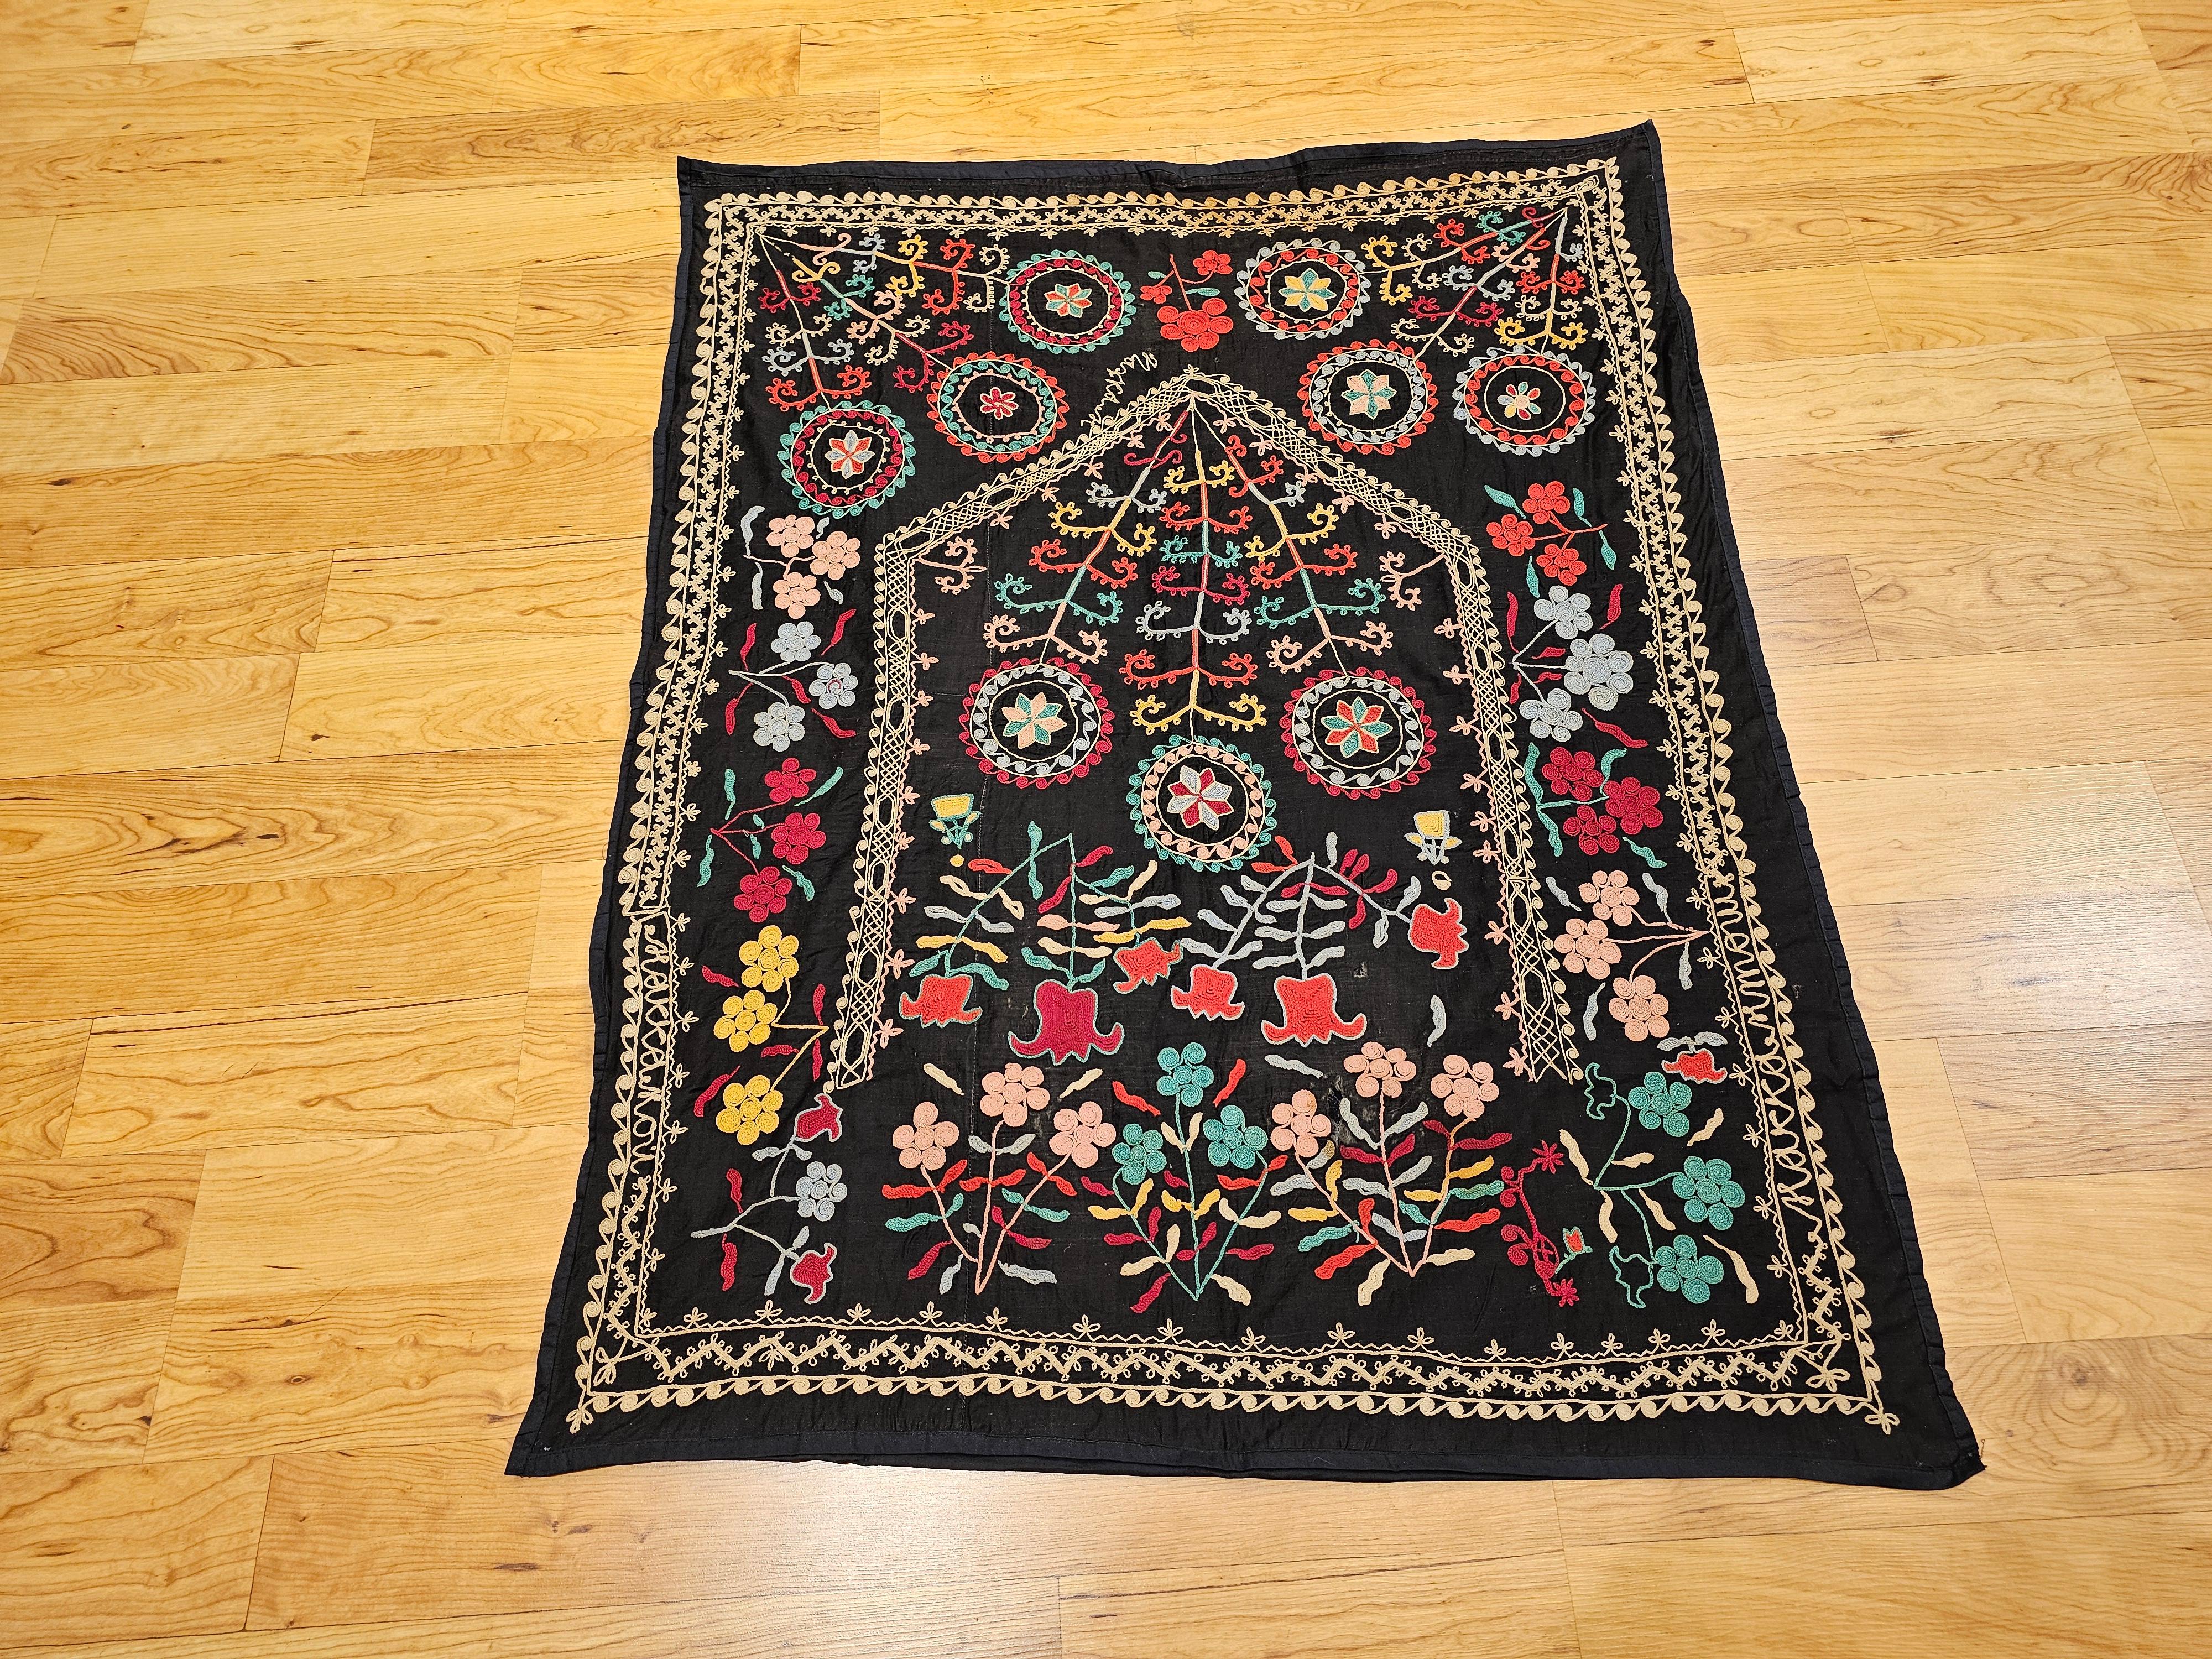 Vintage Hand Embroidered Uzbek Silk Suzani in Black, Red, Green, Yellow Wall Art For Sale 7